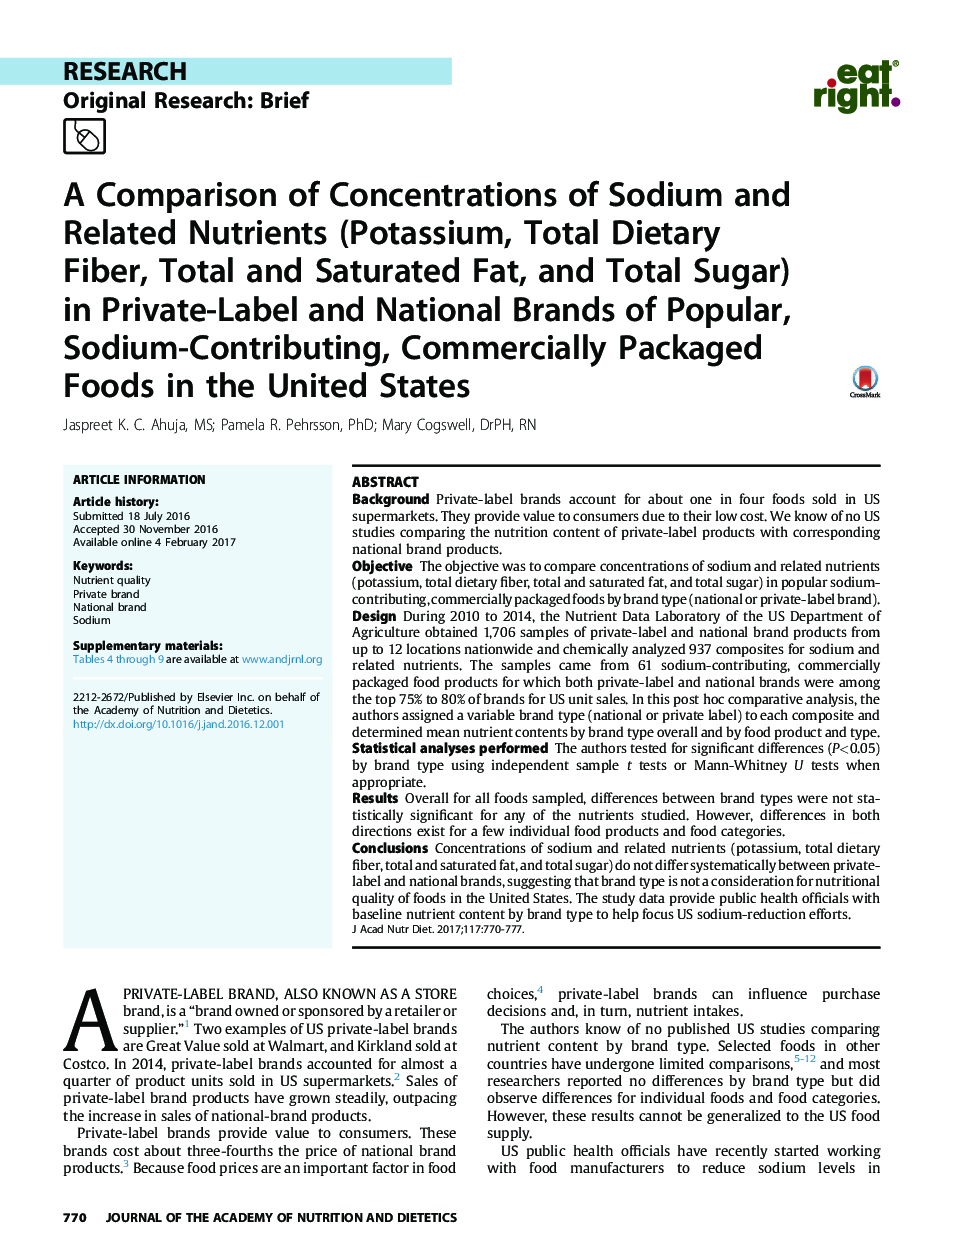 A Comparison of Concentrations of Sodium and Related Nutrients (Potassium, Total Dietary Fiber, Total and Saturated Fat, and Total Sugar) in Private-Label and National Brands of Popular, Sodium-Contributing, Commercially Packaged Foods in the United State